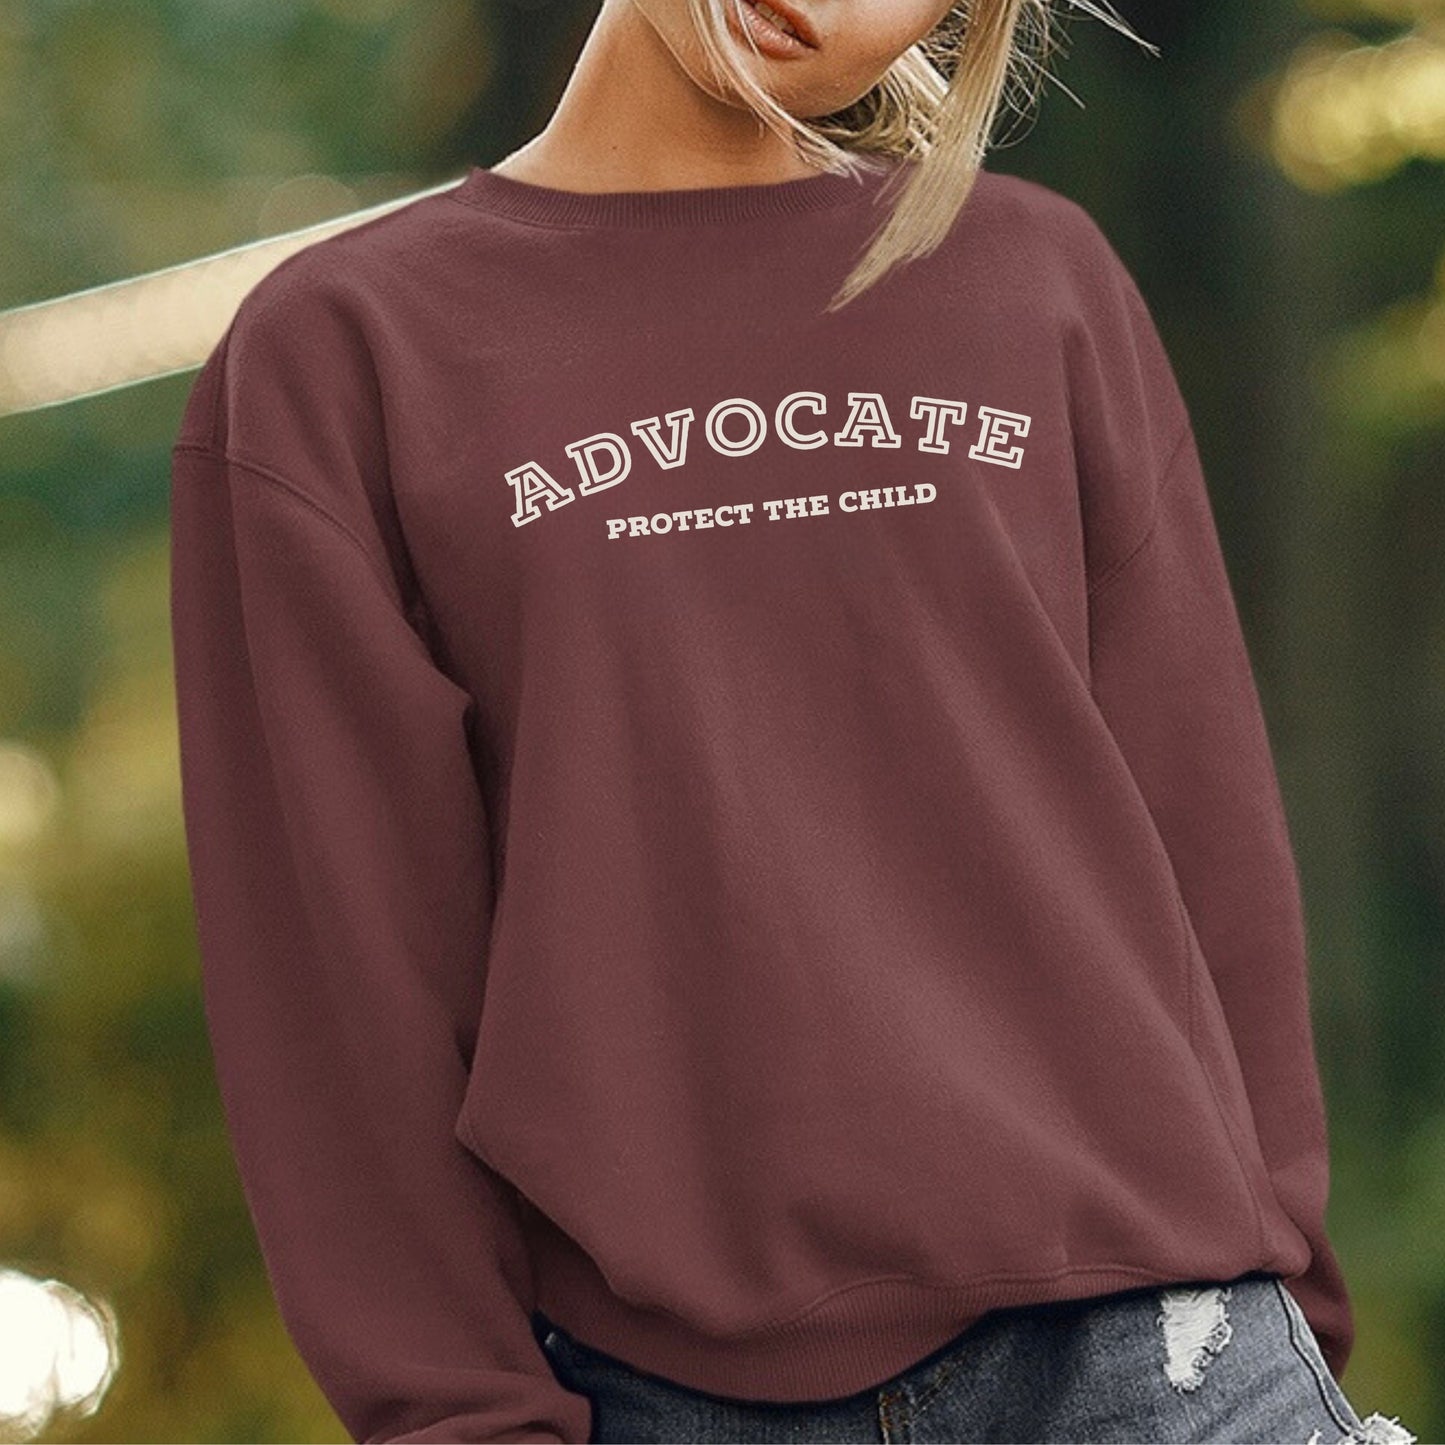 The front of the sweatshirt proudly displays the phrase "Advocate Protecct The Child" in a bold and eye-catching font. Crafted for child advocates and champions of children's mental health, and perfect for Child Abuse Awareness and Prevention Month!